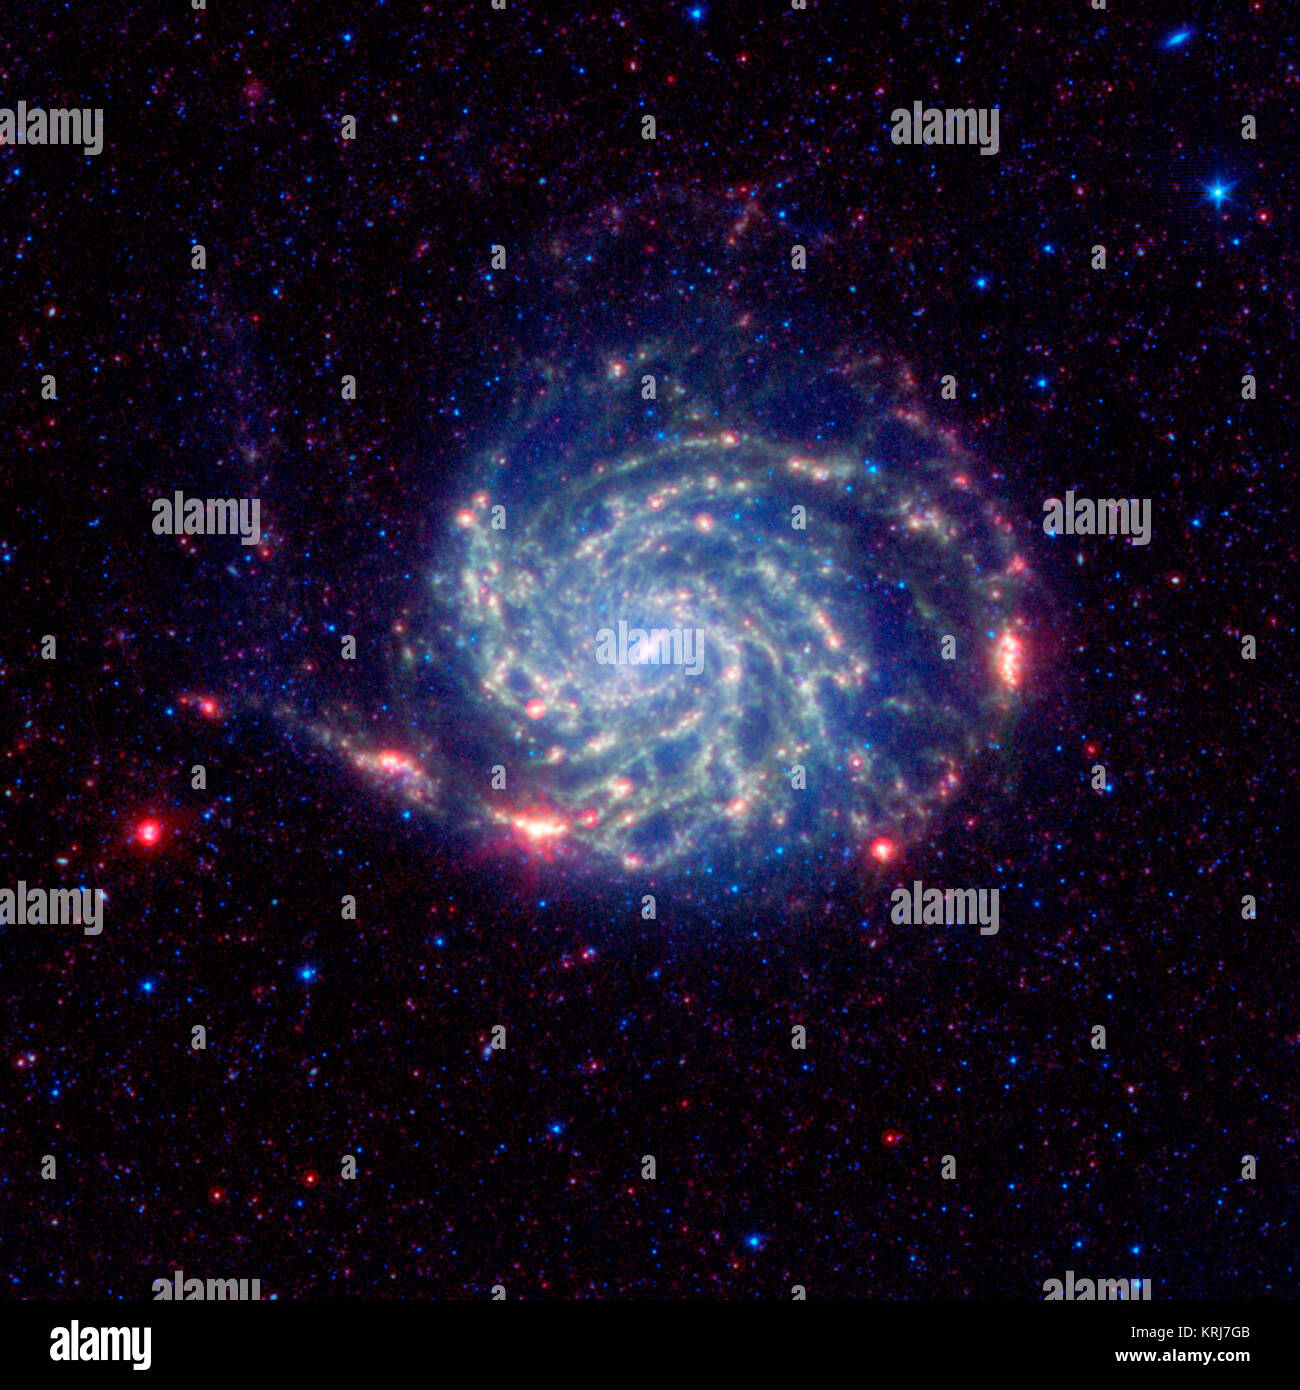 The Pinwheel galaxy, otherwise known as Messier 101, sports bright reddish edges in this new infrared image from NASA's Spitzer Space Telescope. Research from Spitzer has revealed that this outer red zone lacks organic molecules present in the rest of the galaxy. The red and blue spots outside of the spiral galaxy are either foreground stars or more distant galaxies.  The organics, called polycyclic aromatic hydrocarbons, are dusty, carbon-containing molecules that help in the formation of stars. On Earth, they are found anywhere combustion reactions take place, such as barbeque pits and exhau Stock Photo